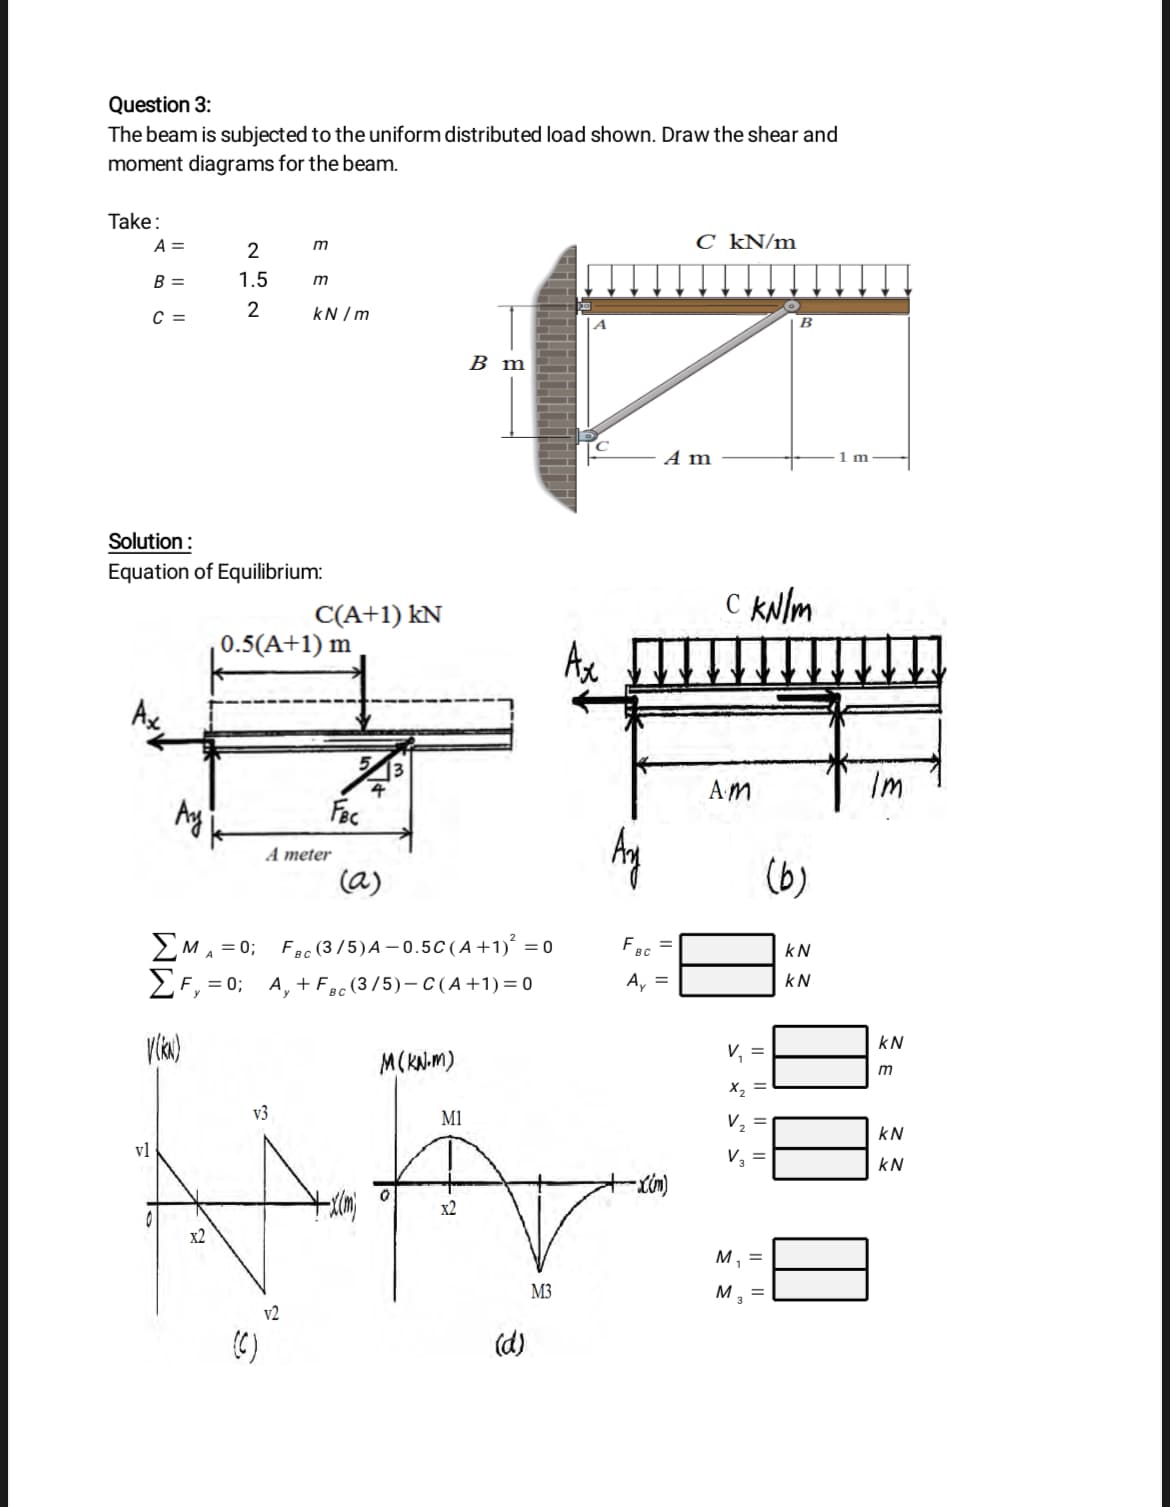 Question 3:
The beam is subjected to the uniform distributed load shown. Draw the shear and
moment diagrams for the beam.
Take:
A =
C kN/m
2
B =
1.5
m
C =
kN /m
B
В m
A m
1m
Solution:
Equation of Equilibrium:
C(A+1) kN
C kNlm
0.5(A+1) m
Ax
4
AM
Im
Fec
A meter
(a)
(b)
2MA = 0; Fec (3 /5)A – 0.5C(A +1)° = 0
F, = 0; A, + Fec (3/5)- C(A +1) = 0
kN
A, =
kN
kN
V, =
M(KN.M)
m
X2
v3
M1
V2
kN
vl
V, =
kN
x2
x2
м,
M3
M, =
v2
(C)
(d)
